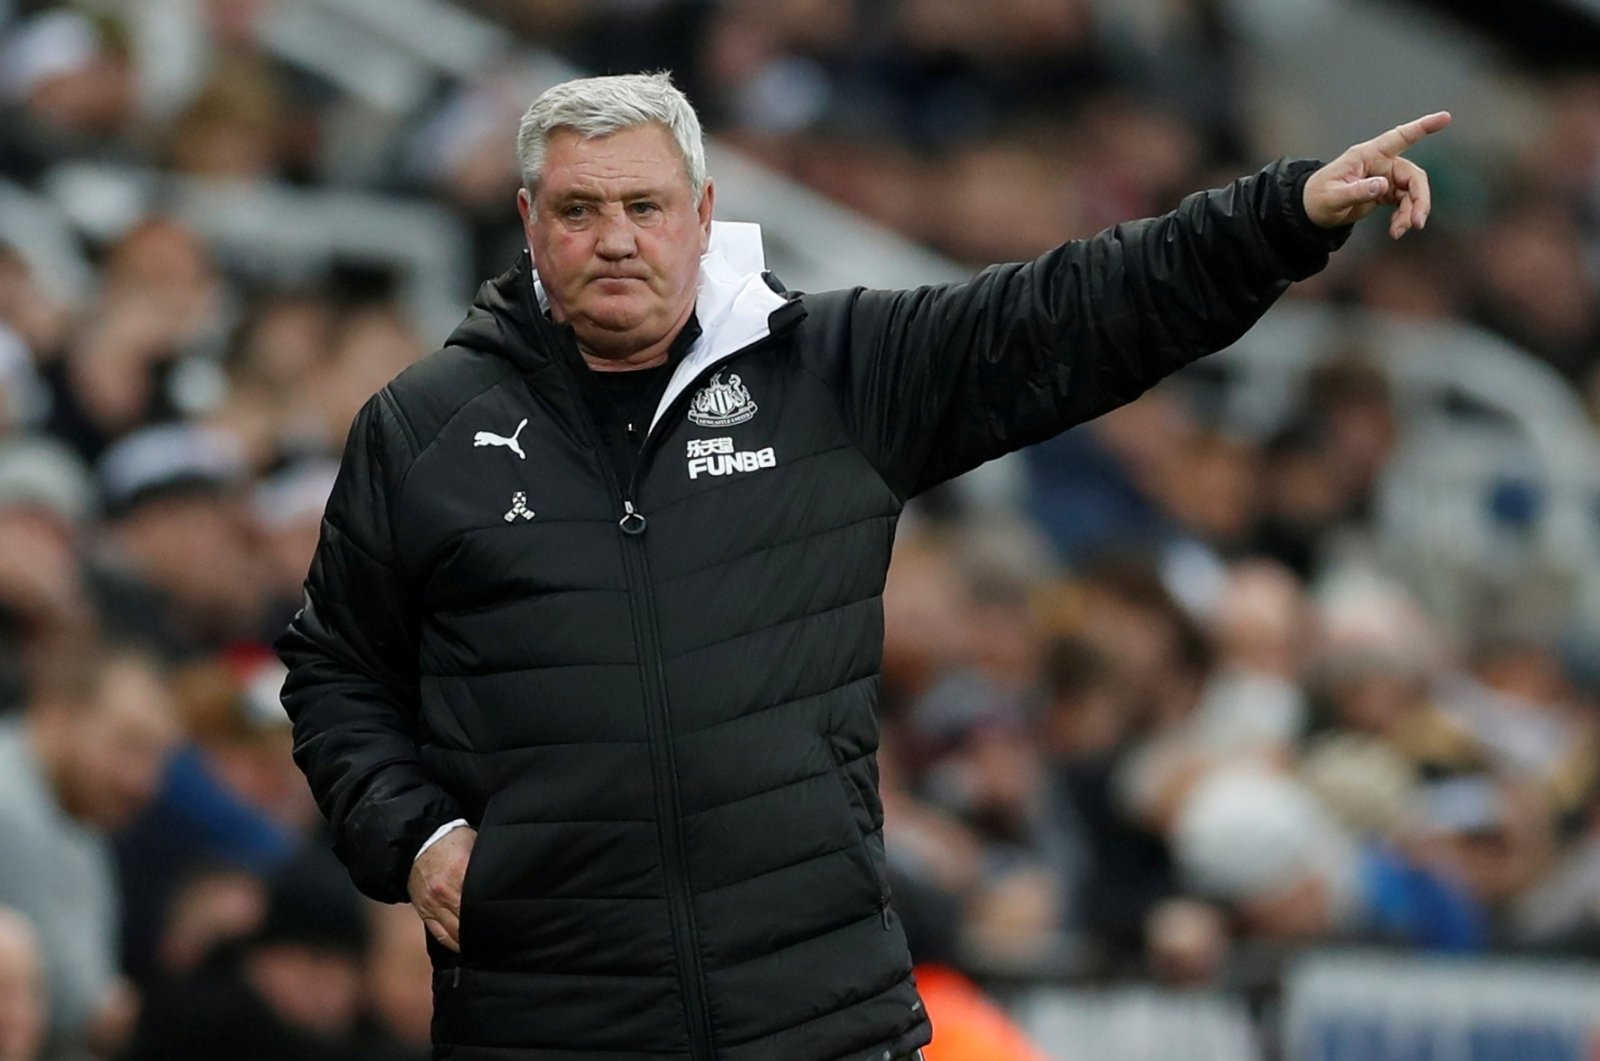 Newcastle United manager Steve Bruce reacts during a Premier League match against Crystal Palace at St James' Park, Newcastle, England, Dec. 21, 2019. (Reuters Photo)